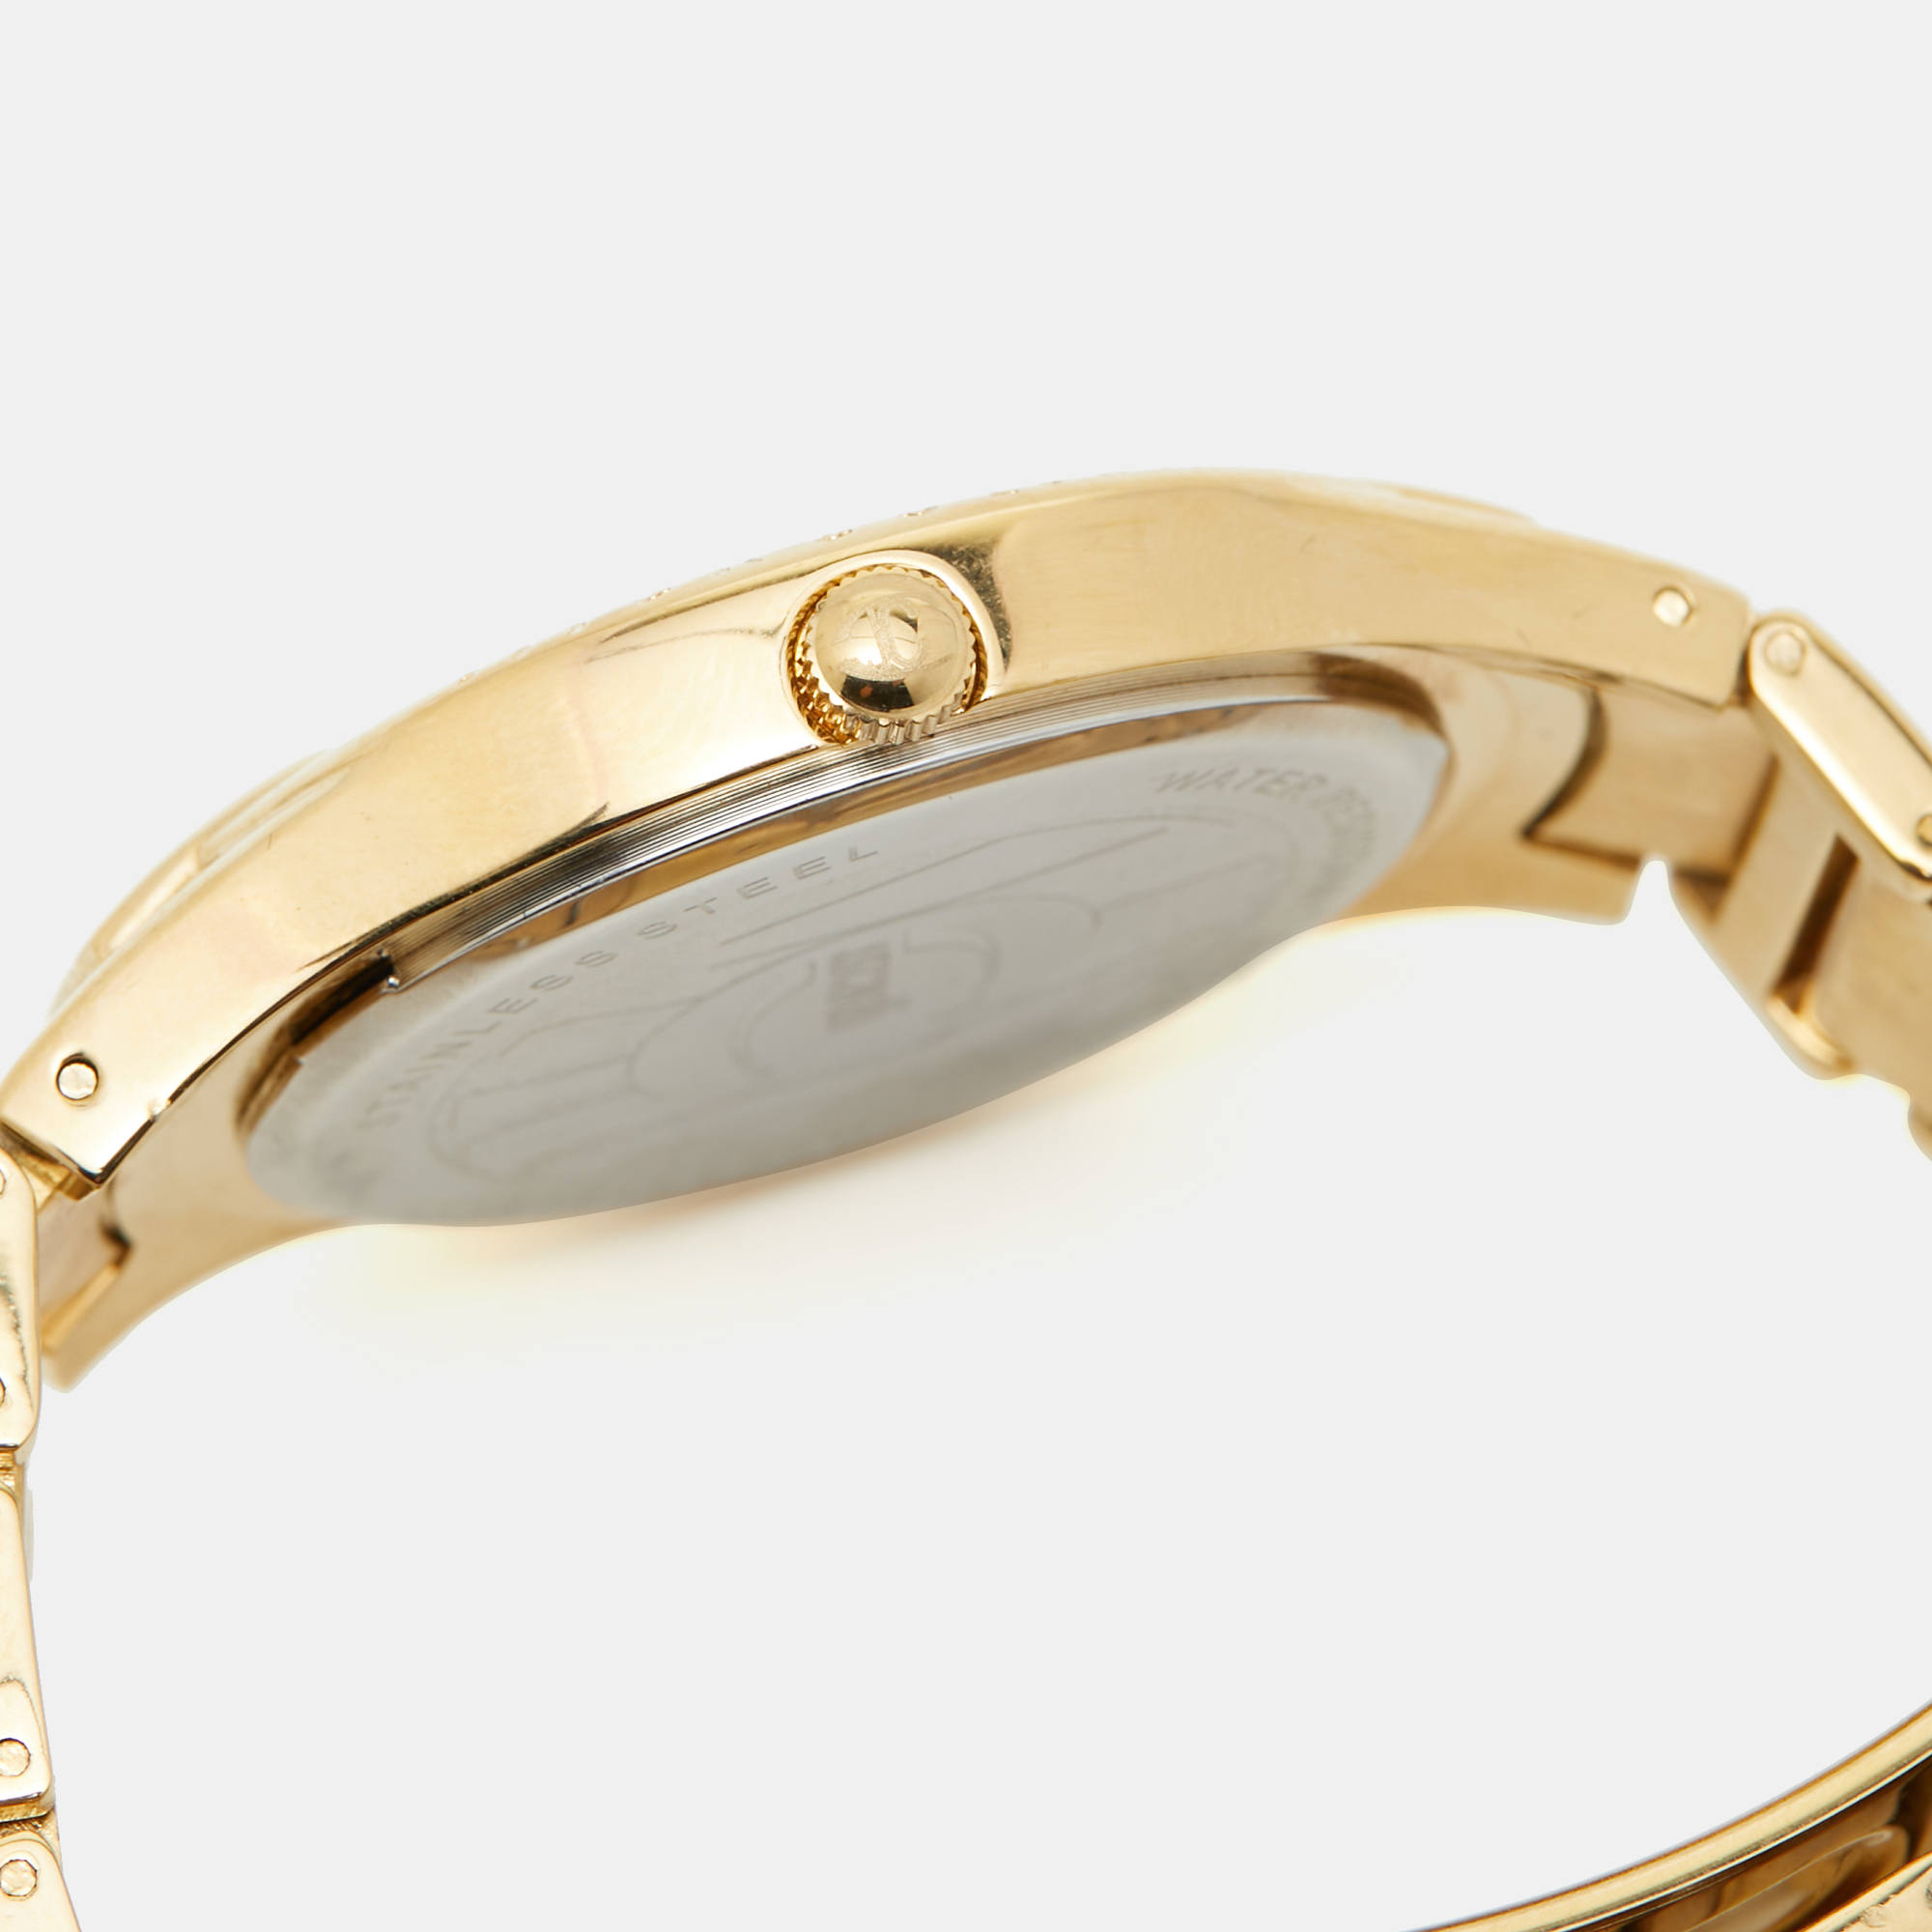 Just Cavalli Champagne Yellow Gold Plated Stainless Steel Instinct R7253164517 Women's Wristwatch 38 Mm